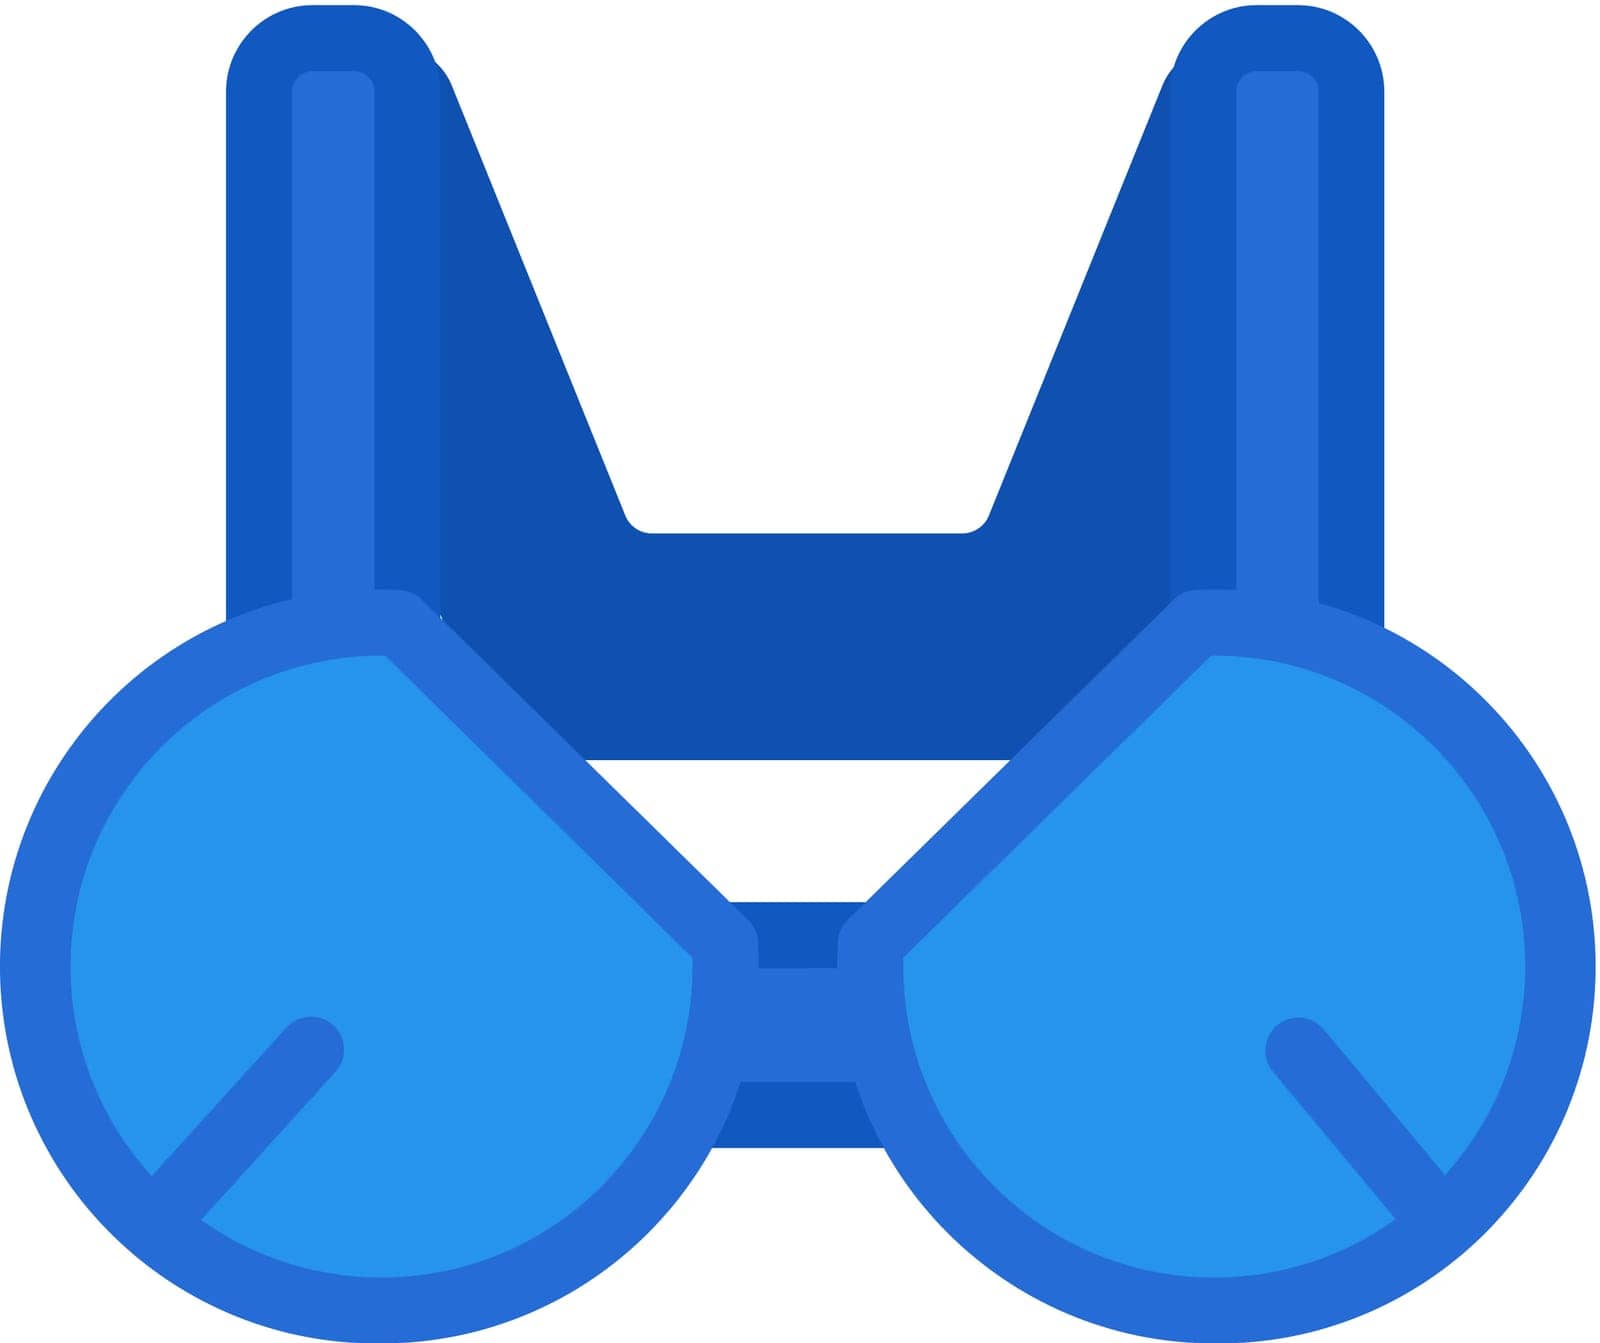 Clothes Flat Color Strapless Bra Pictogram by barsrsind